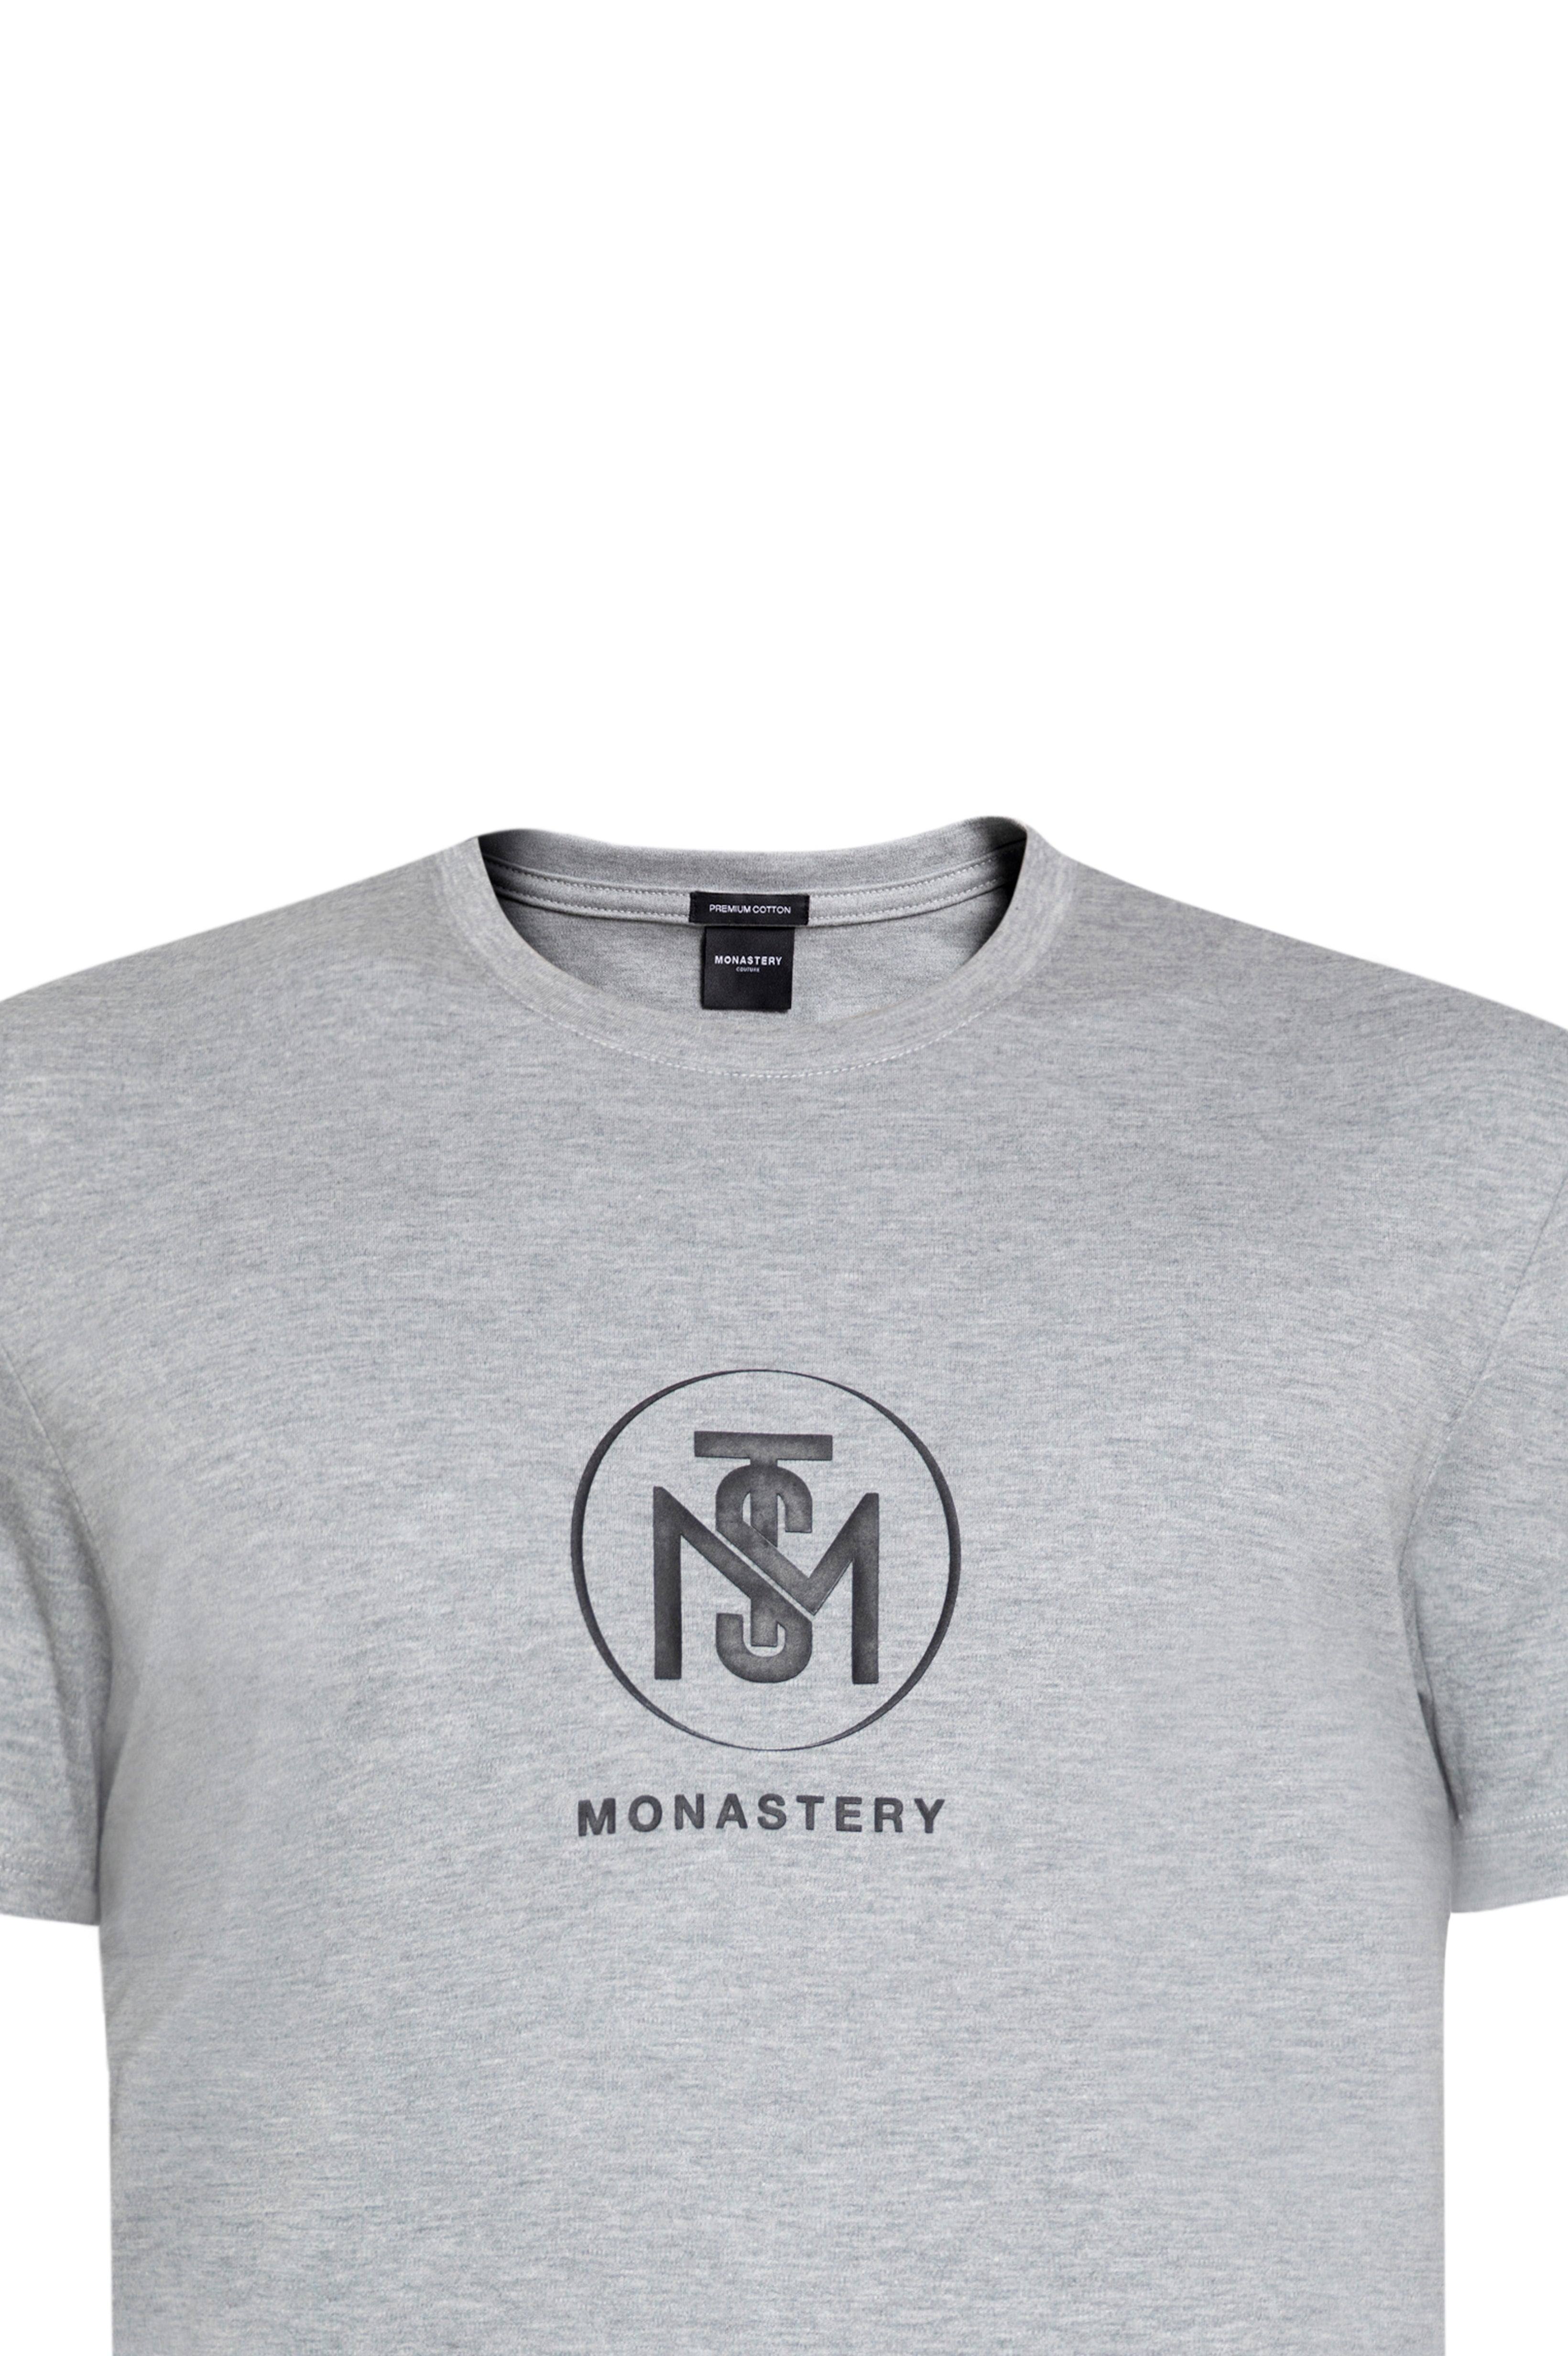 MADISON T-SHIRT JASPED GREY | Monastery Couture